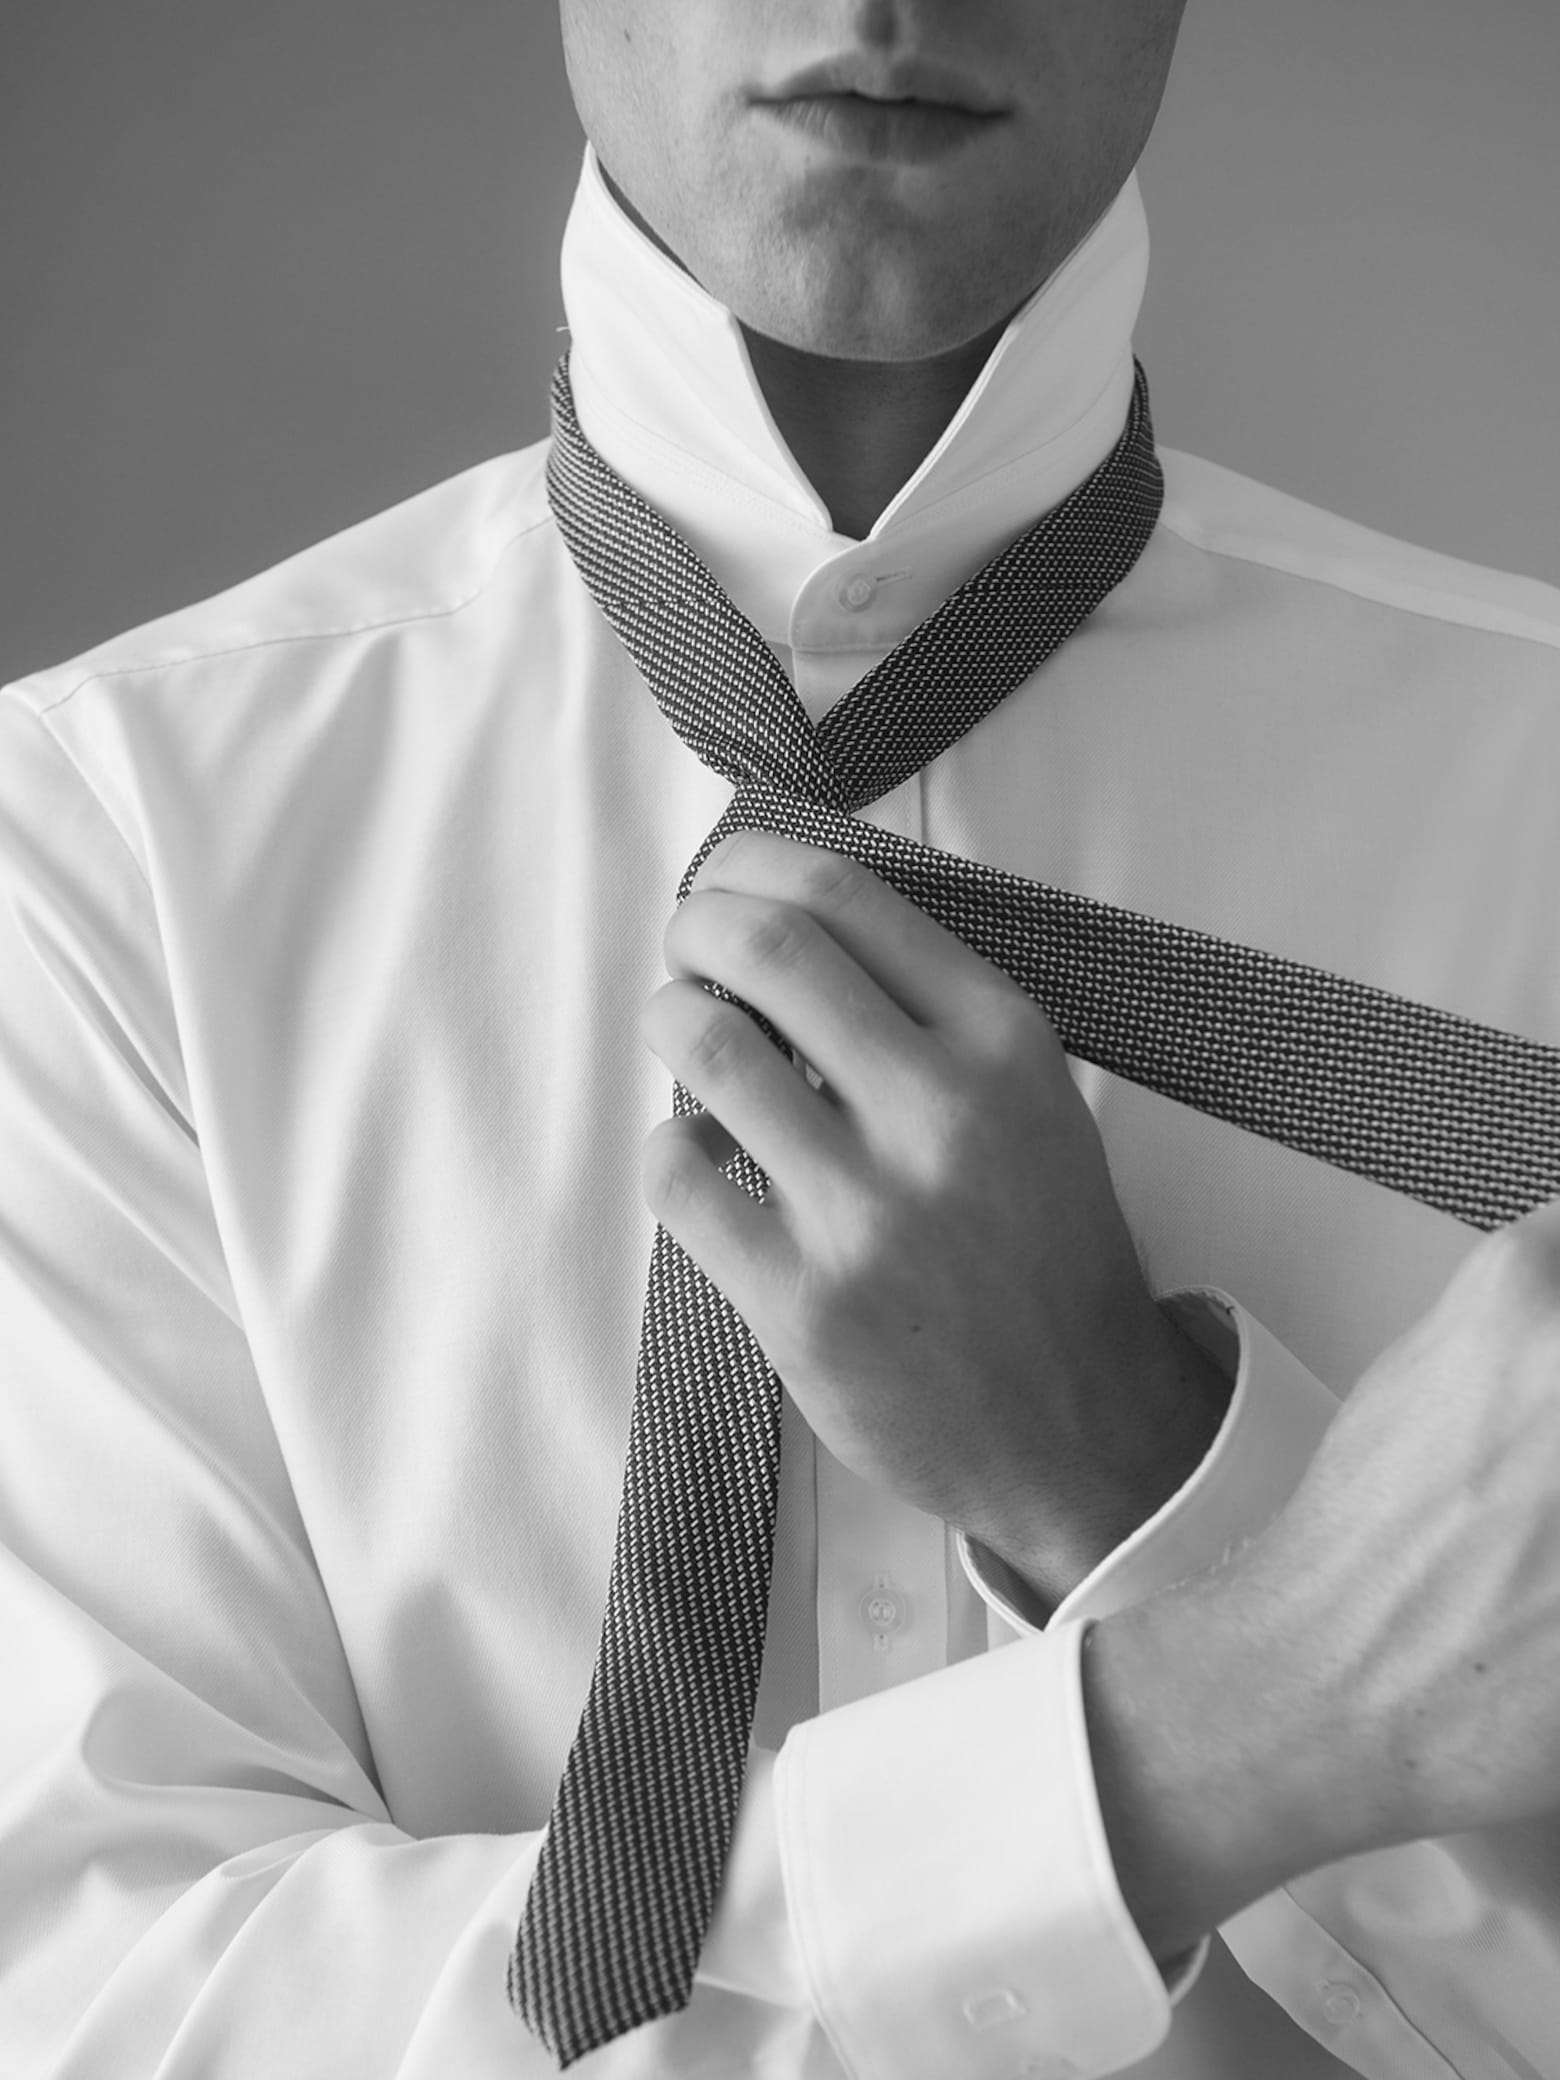 Step by step How to tie a tie